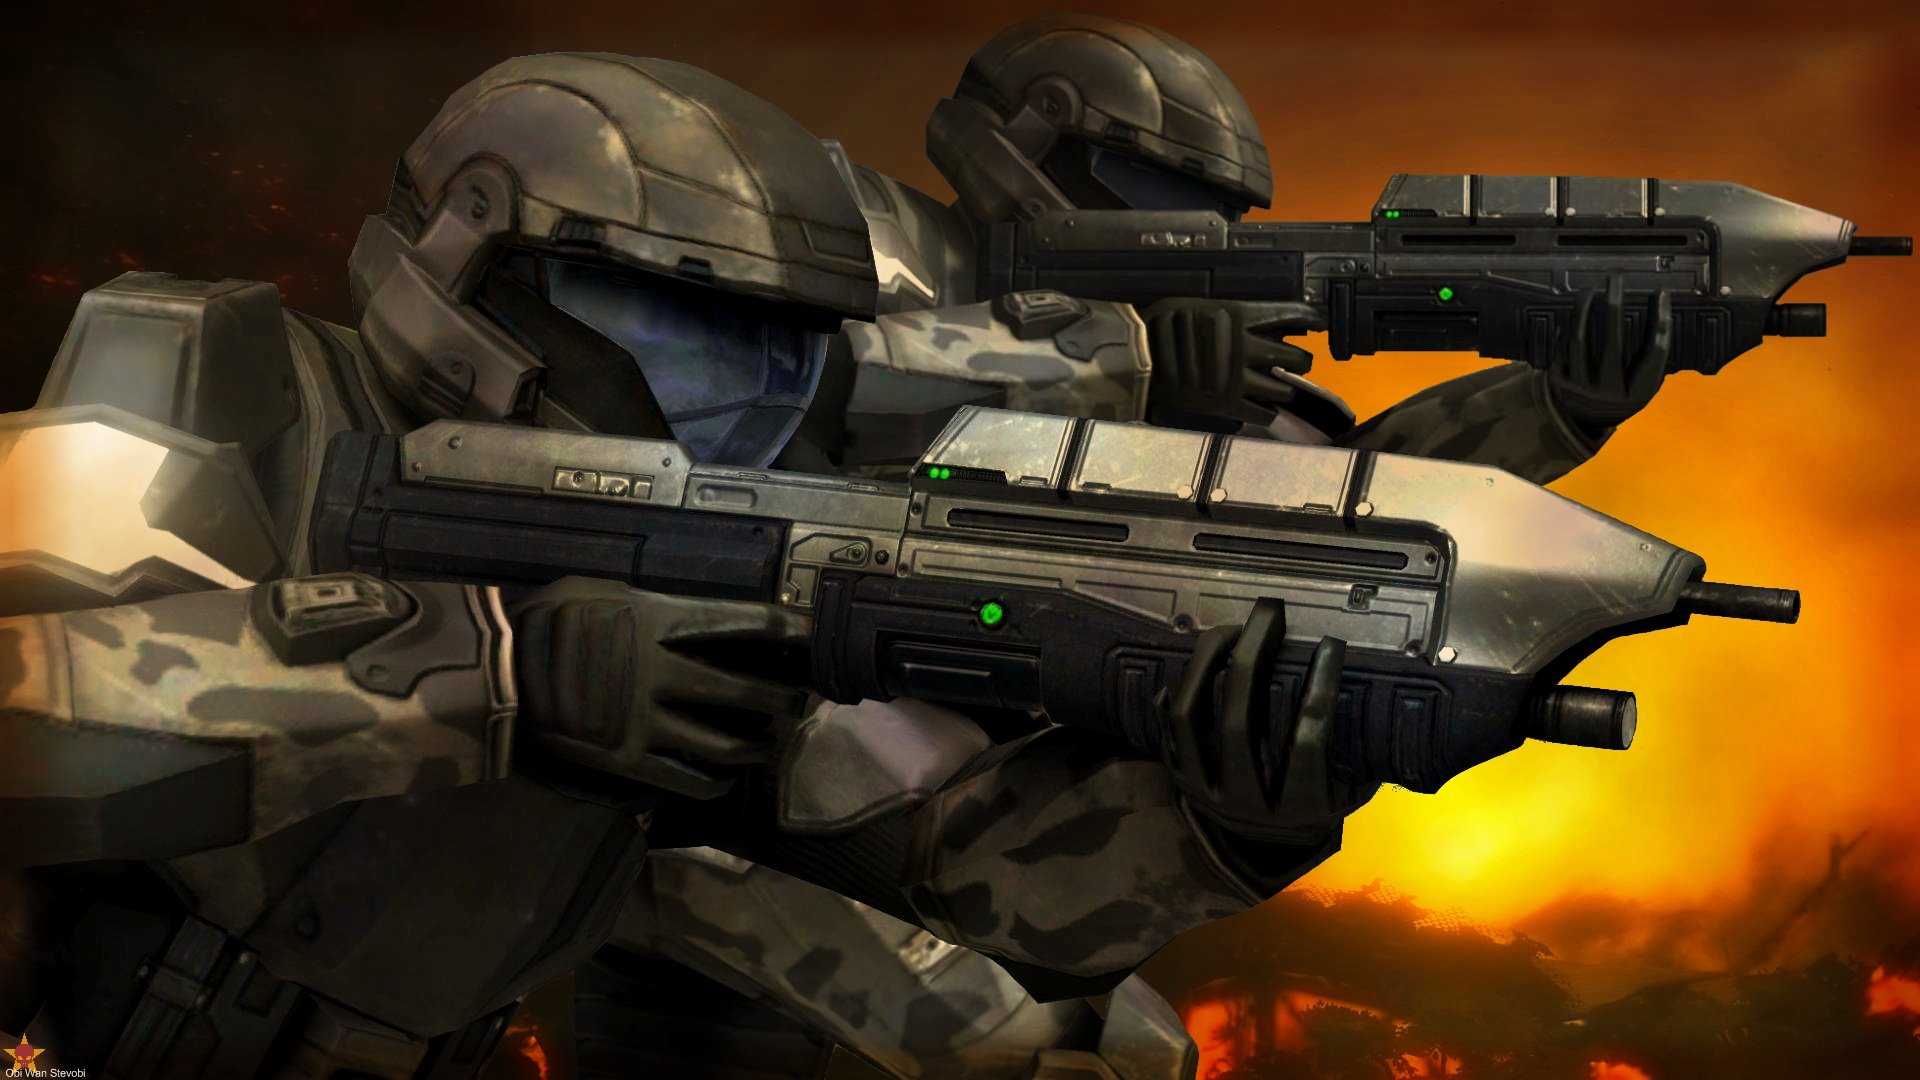 Halo Odst Wallpaper HD In Games Imageci